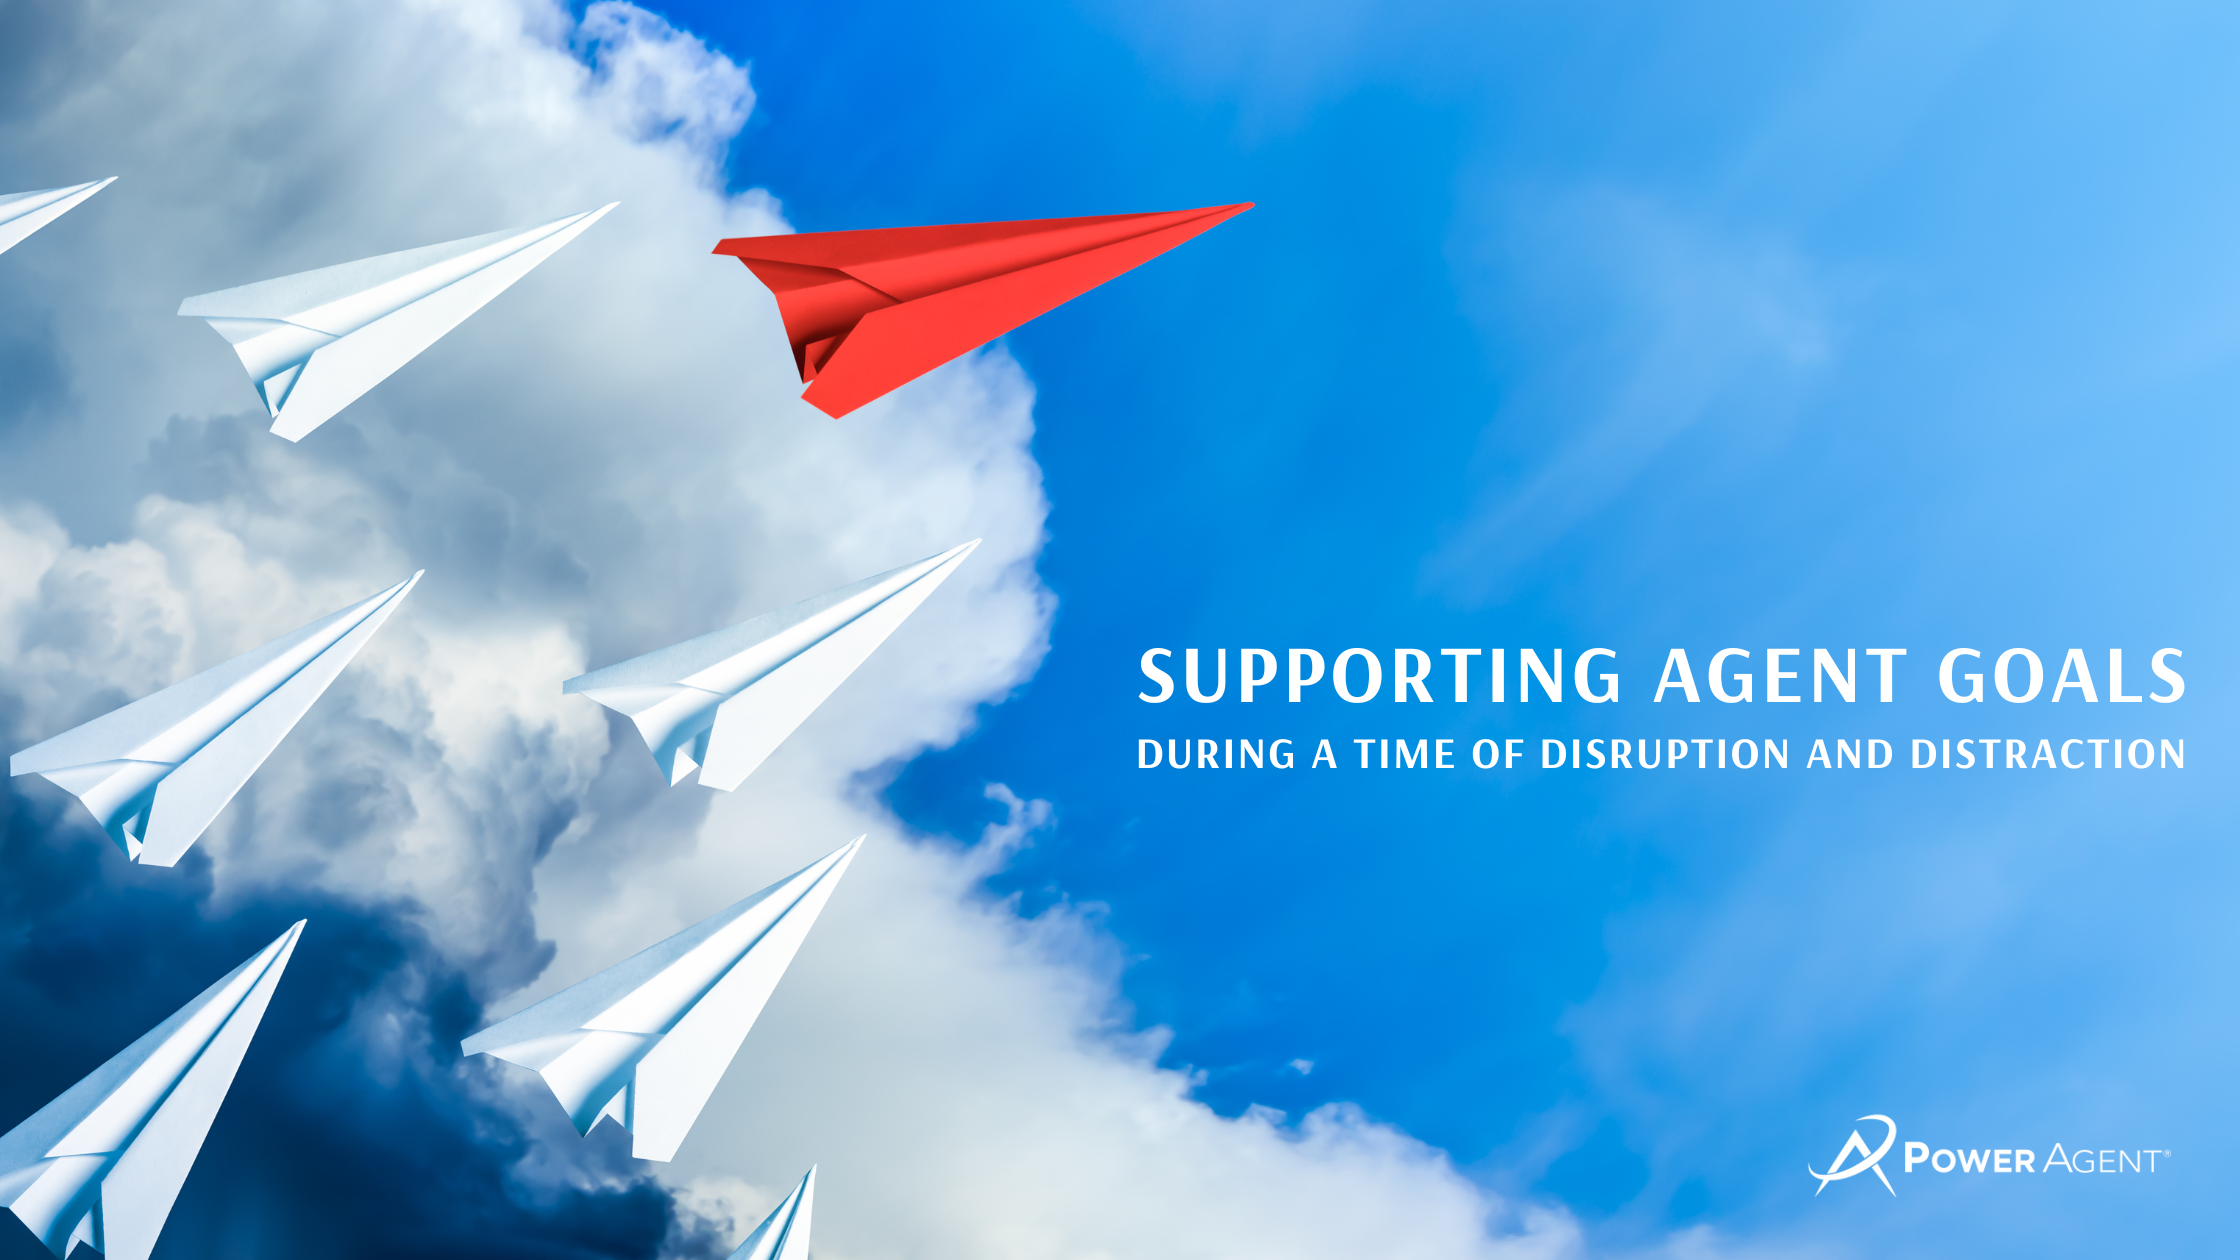 Supporting Agent Goals During a Time of Disruption and Distraction